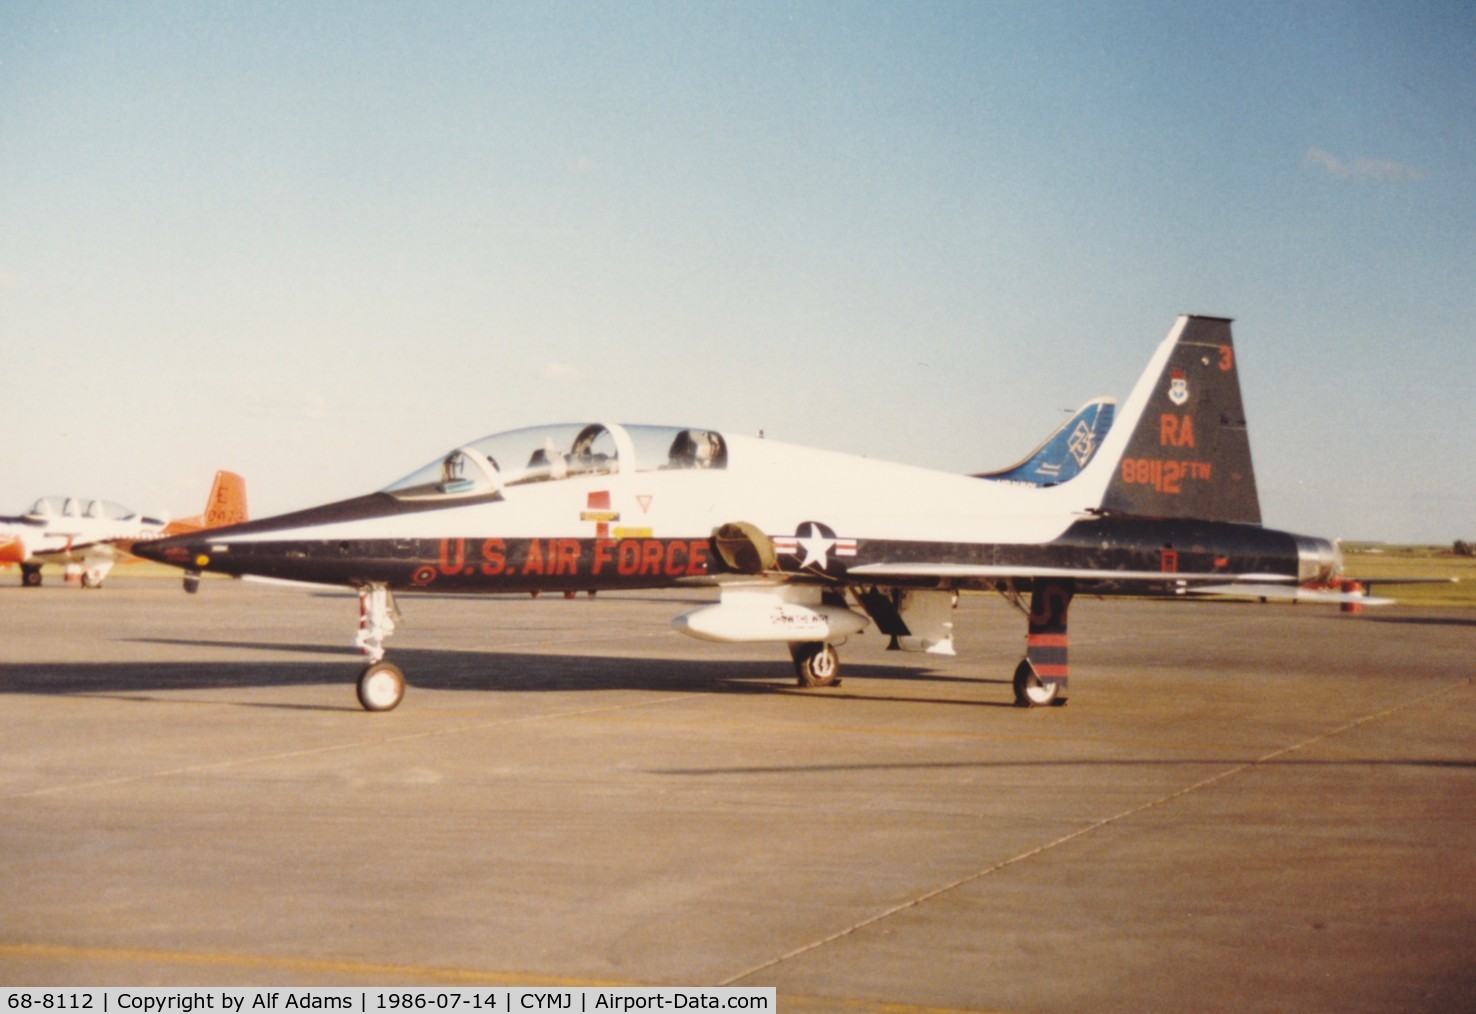 68-8112, 1968 Northrop T-38C Talon C/N T.6117, Photo shows T-38 Talon 68-8112 on display at the annual airshow at Canadian Forces Base Moose Jaw, Saskatchewan, Canada in 1986.